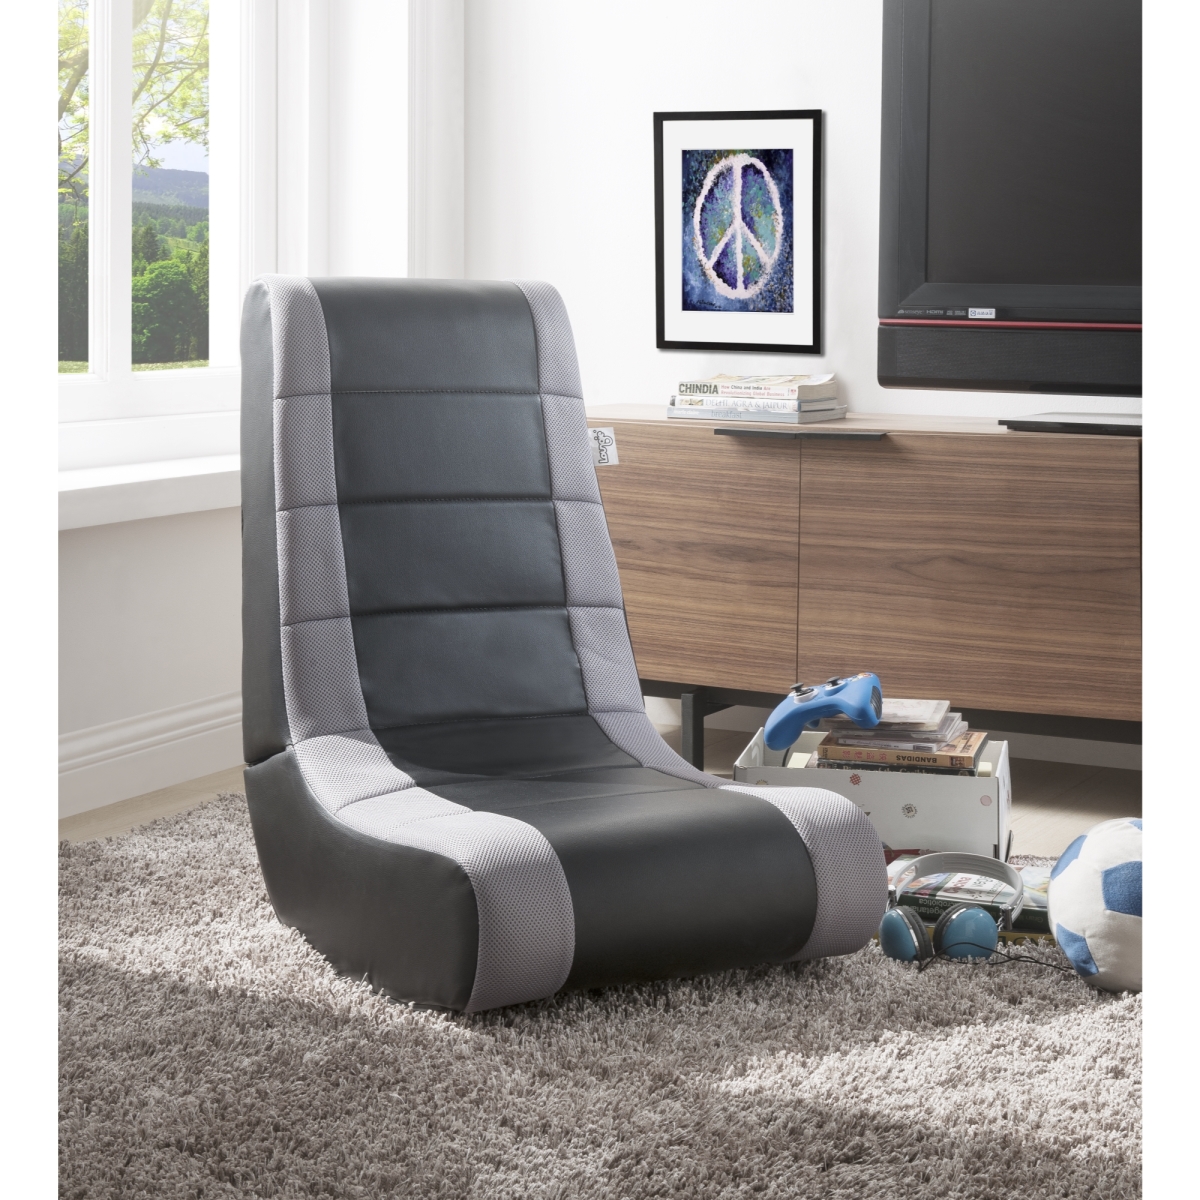 Rockme Video Gaming Rocker Chair For Kids Teens Adults & Boys Or Girls - Black With Silver